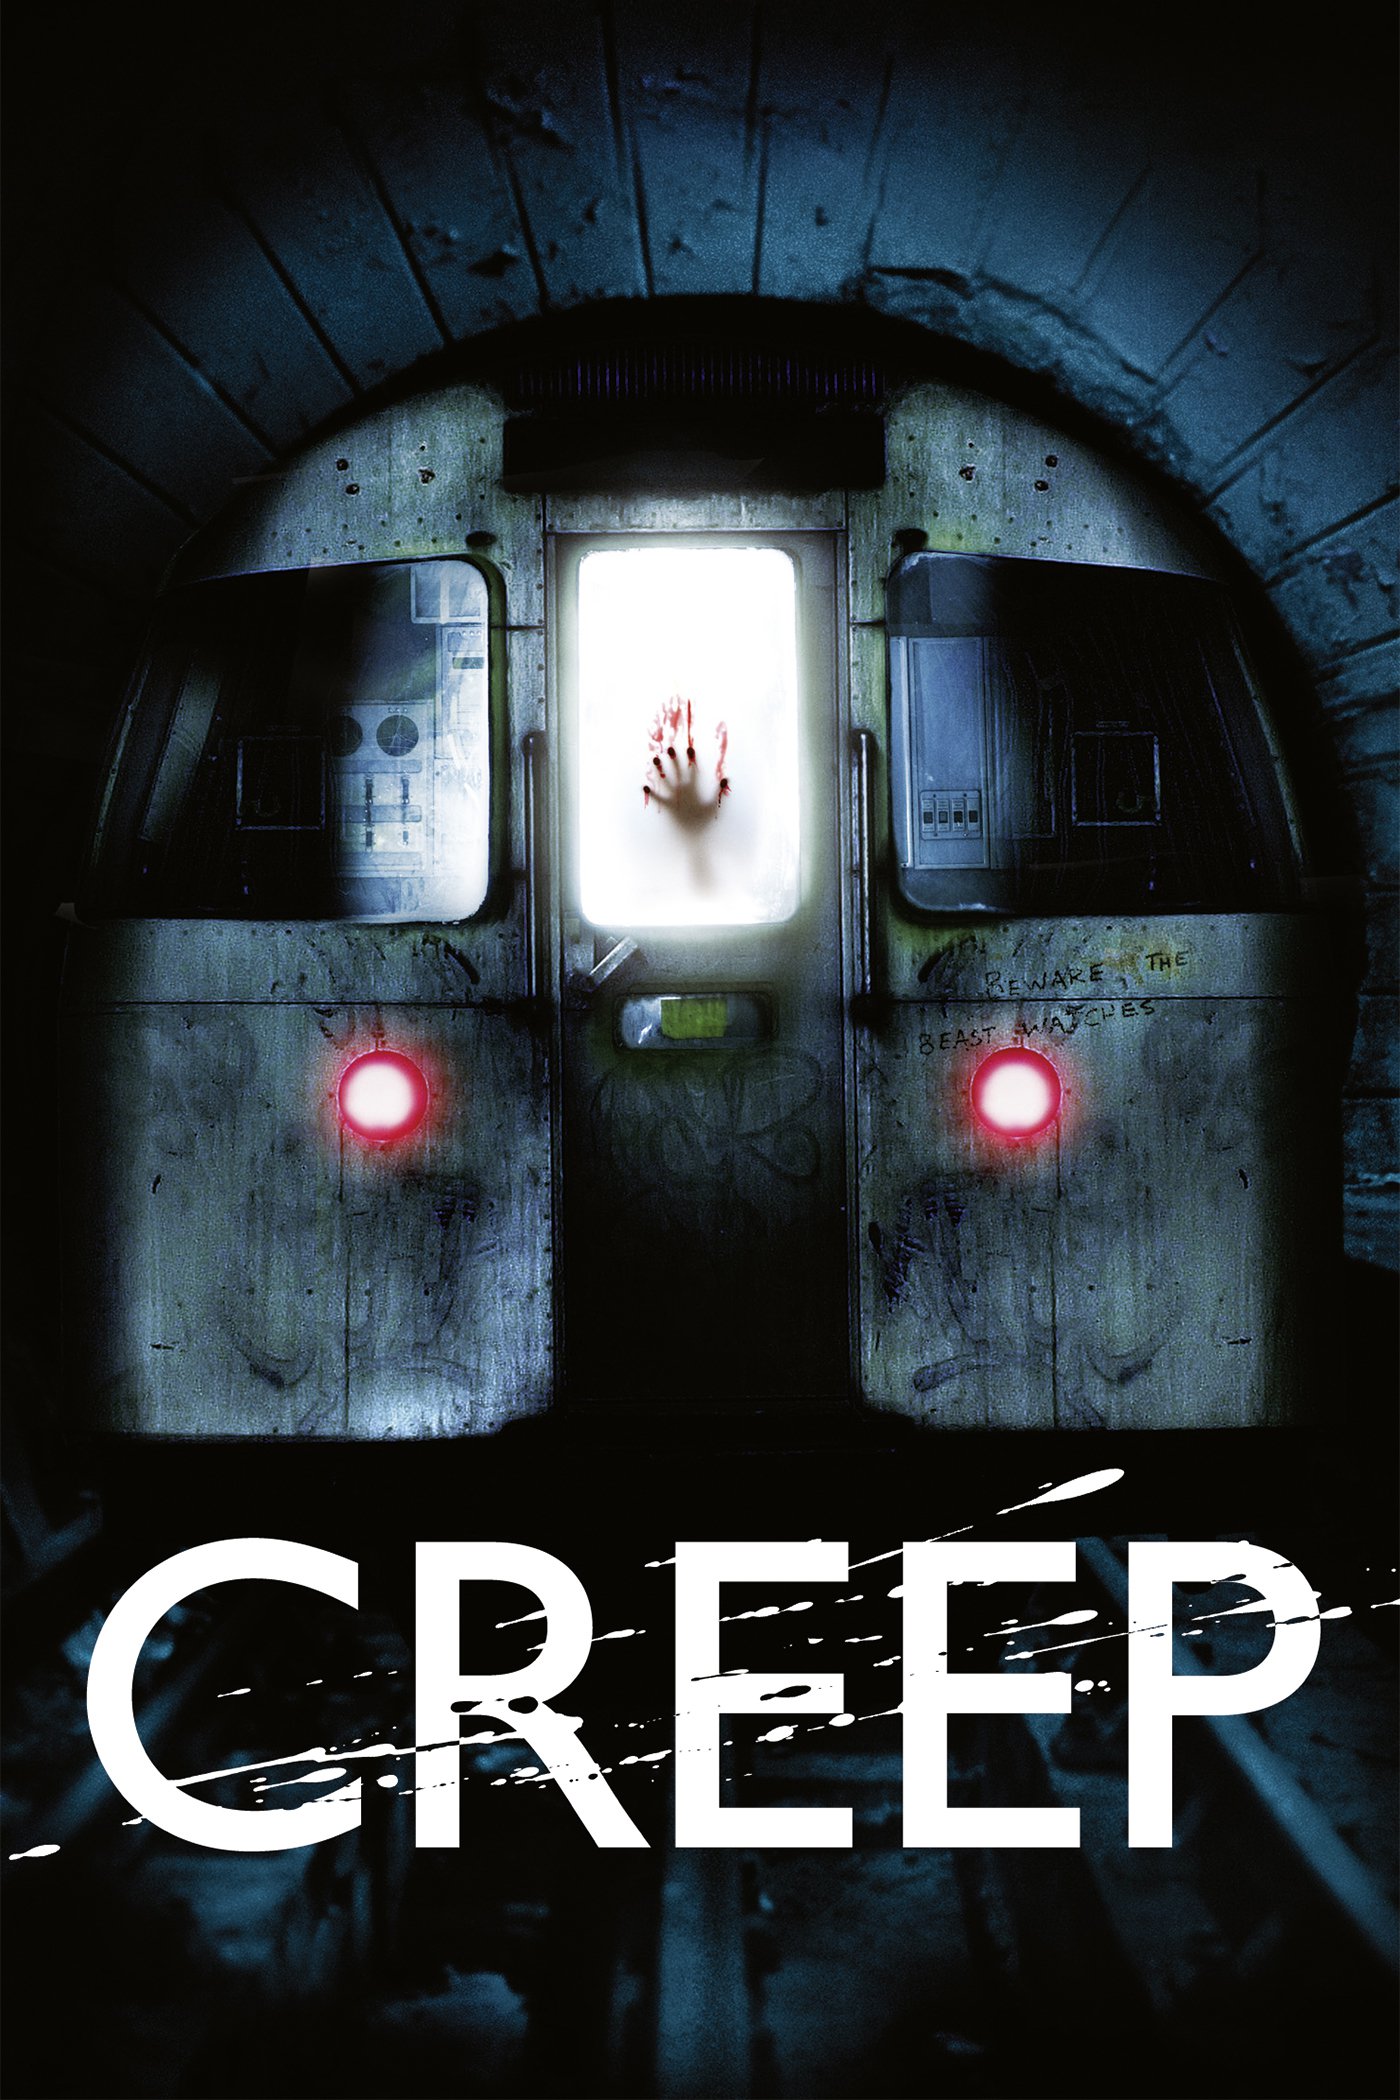 Poster for the movie "Creep"